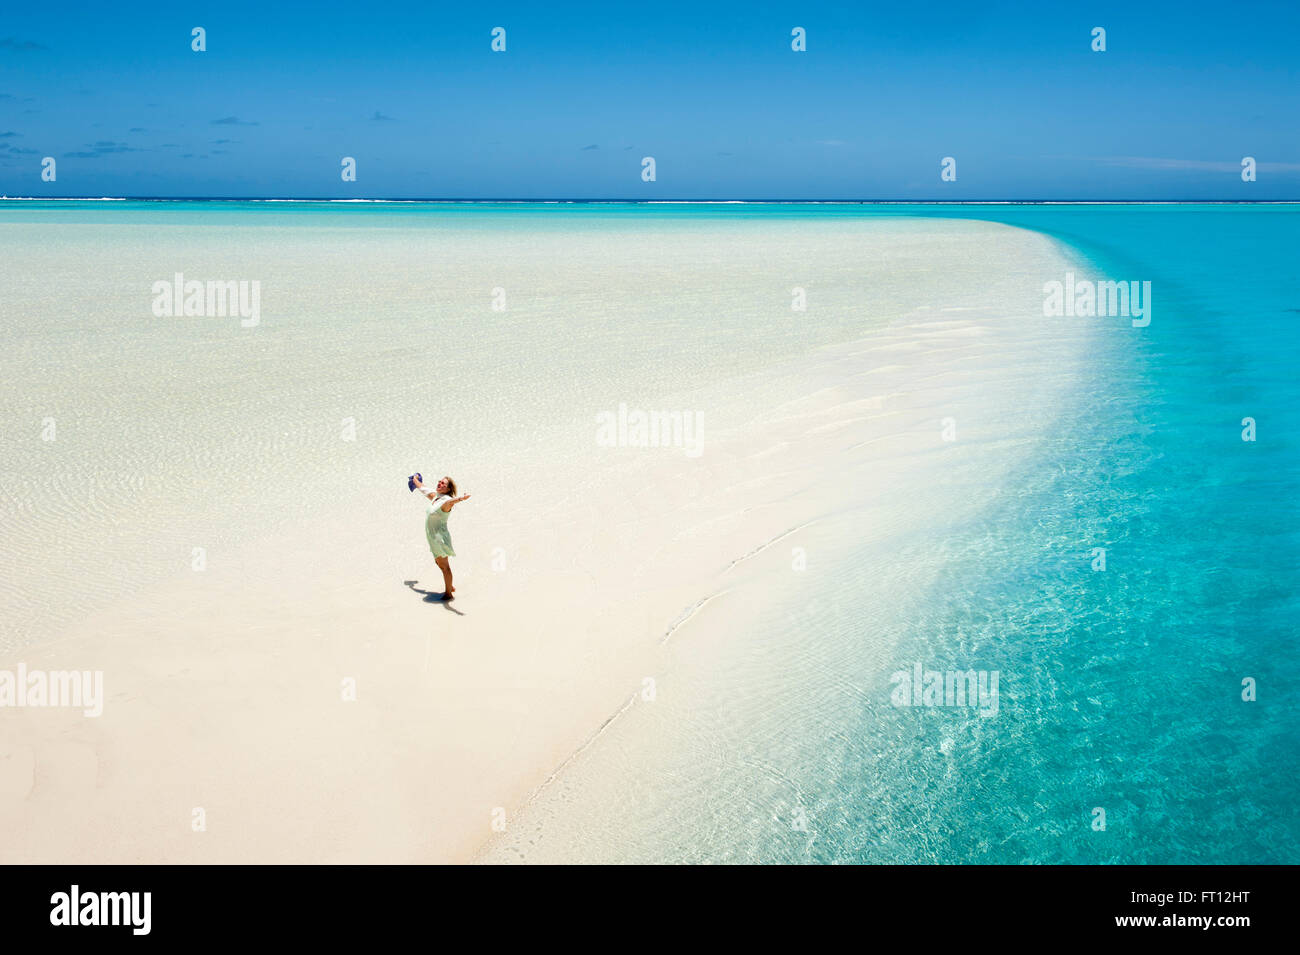 A woman opening her arms in delight on a sand bank at One Foot Island in Aitutaki Lagoon, Aitutaki, Cook Islands, South Pacific Stock Photo